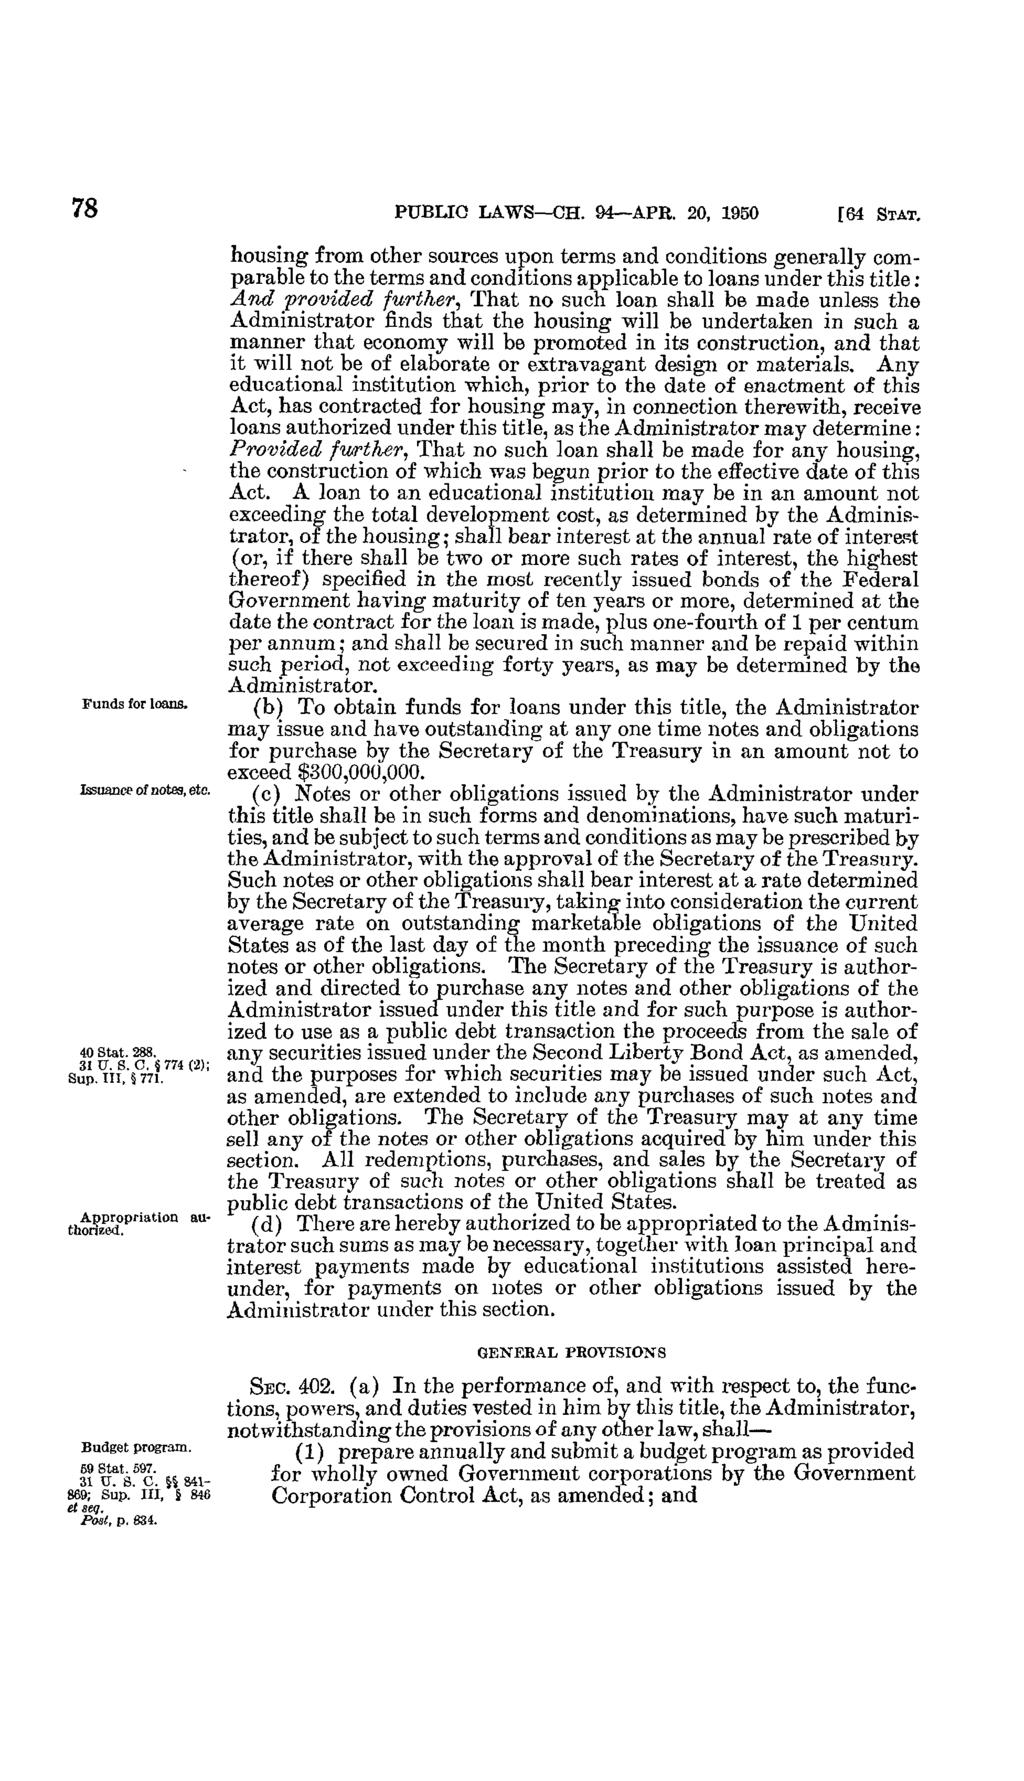 78 PUBLIC LAWS-CH. 94-APR. 20, 1950 [64 STAT, Funds for loans. Issuance of notes, etc. 40 Stat. 288. 31 U. S. C. 774 (2) ; Sup. III, 771. Appropriation authorized. Budget program. 59 Stat. 597. 31 U. S. C. 841-869 ; Sup.